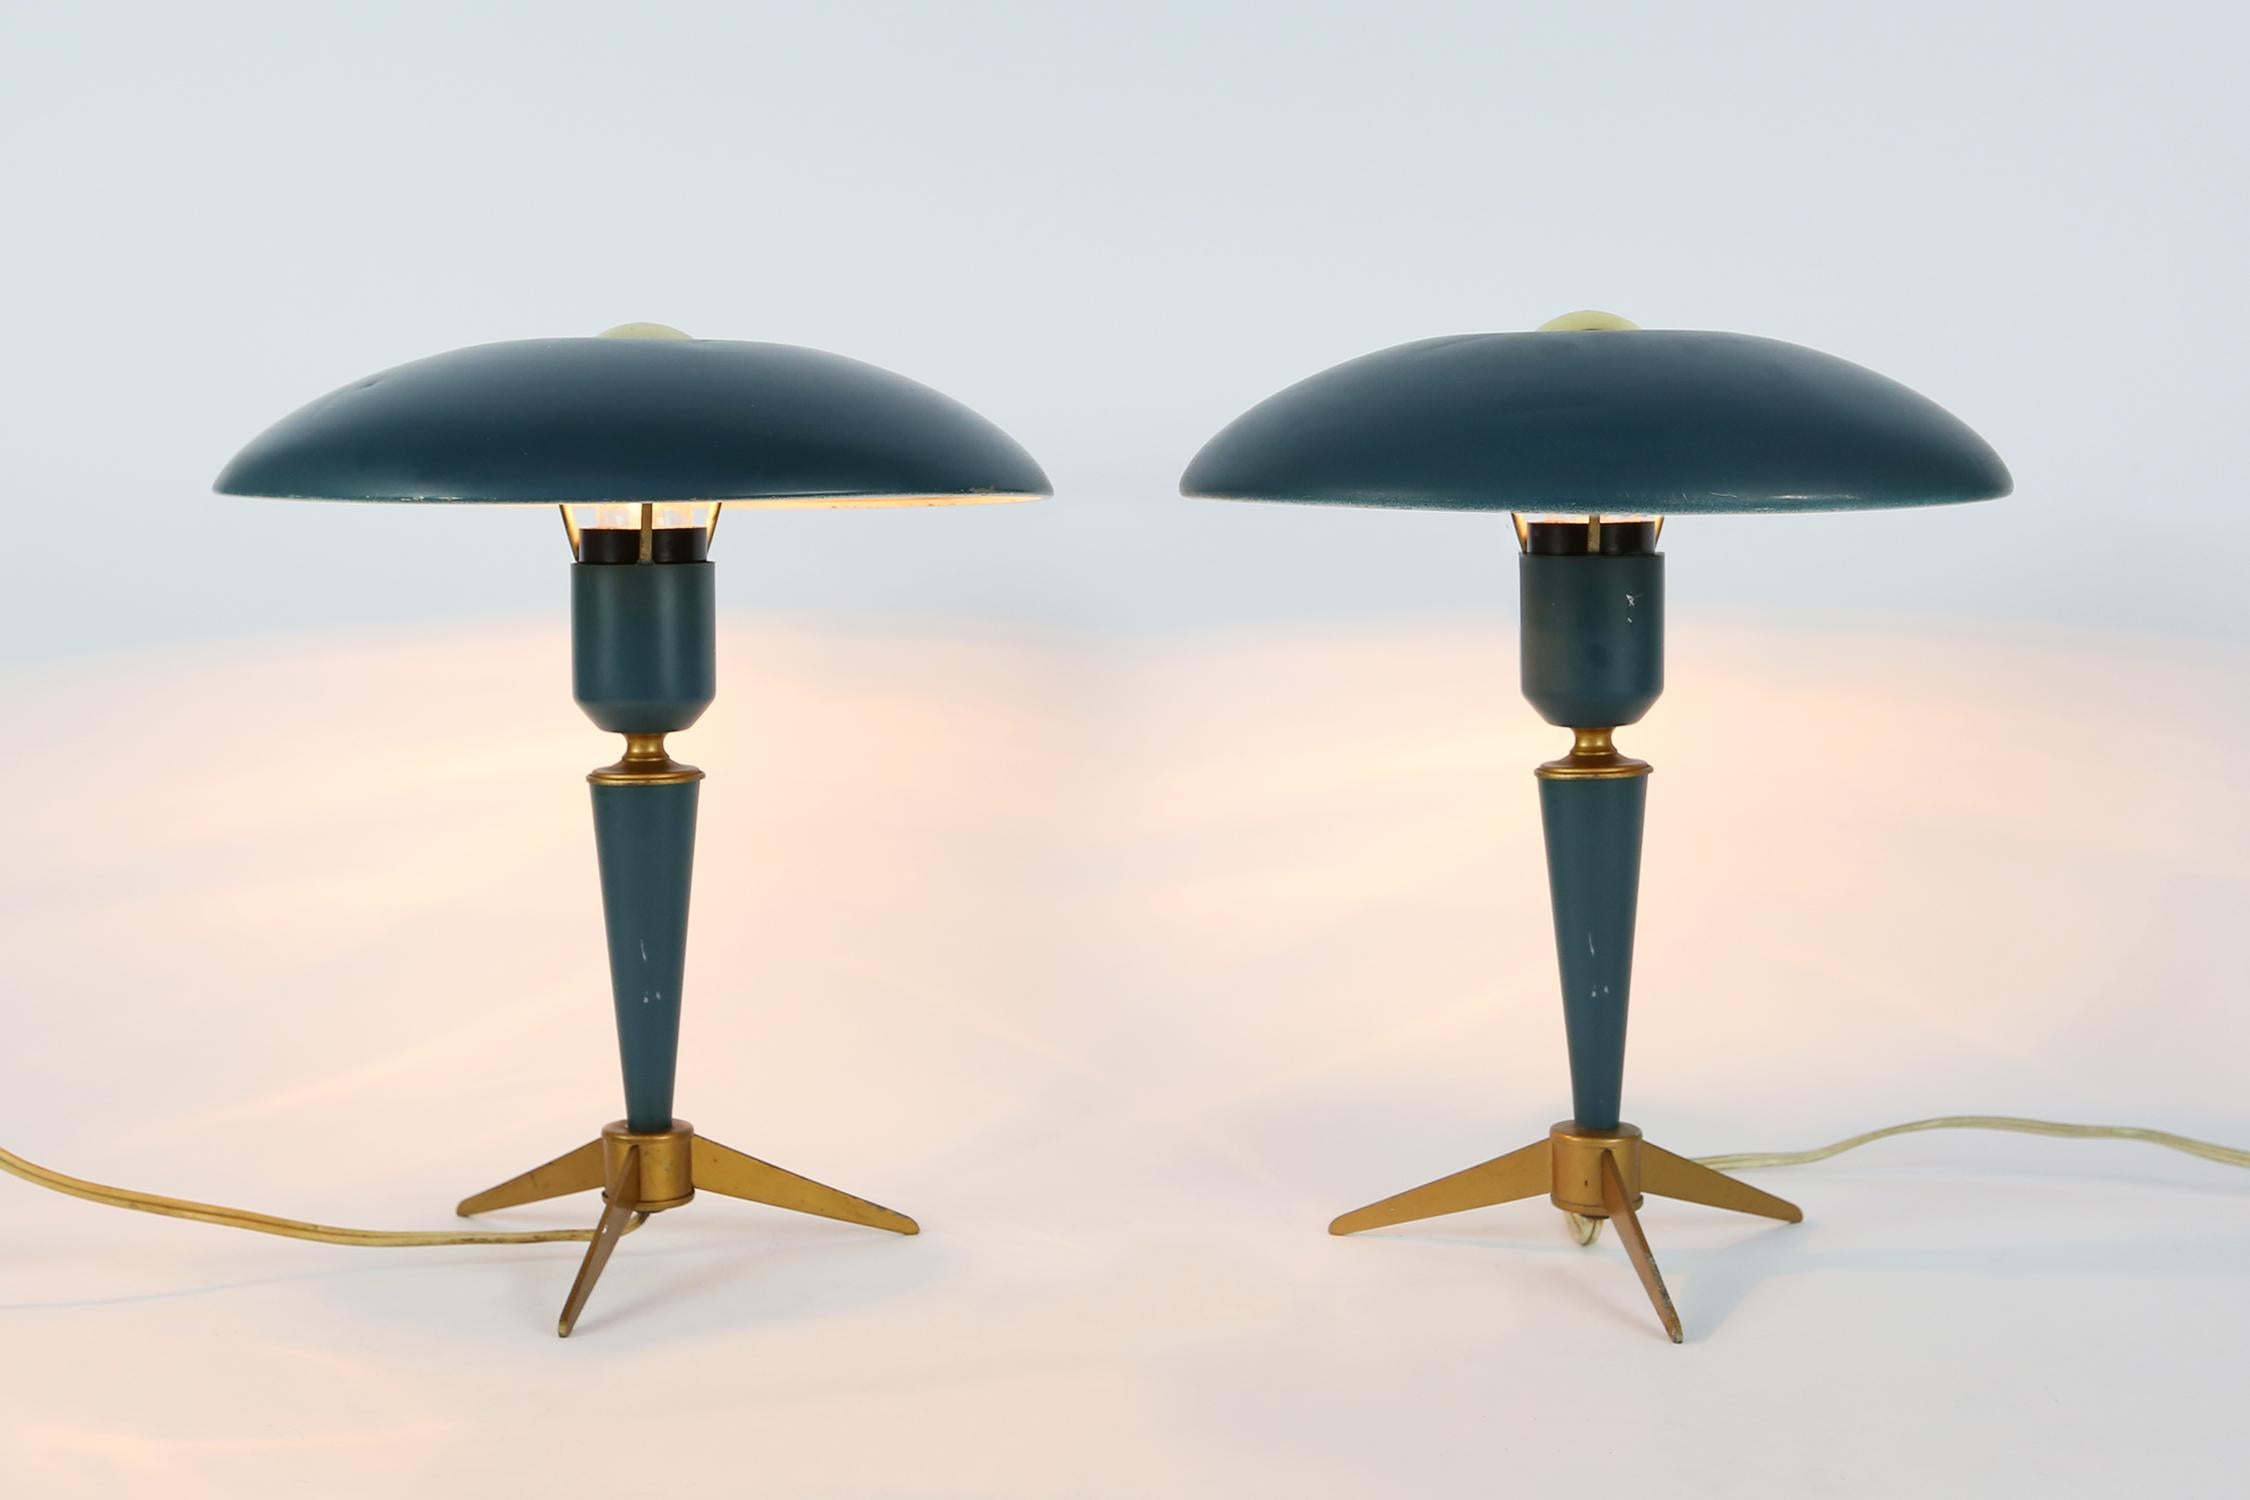 Set of 2 tripod table lamps by Louis Kalff for Philips, Dutch, 1950s. Produced in Belgium. 

The architect and designer Louis Kalff (1897-1976) joined Philips in 1925. Kalff set out to modernize the visual image of the company straight away by